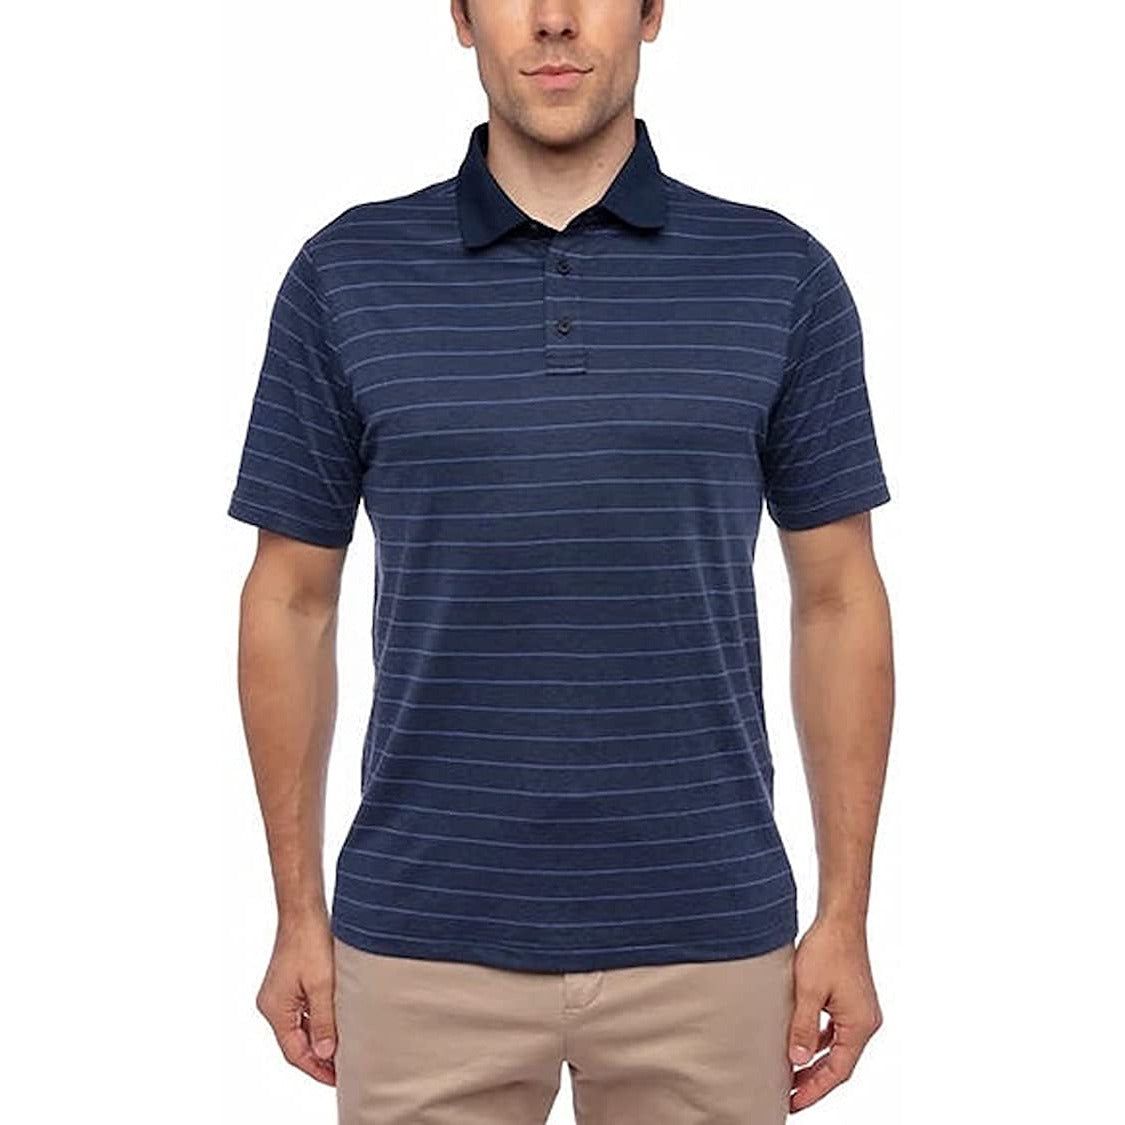 Glacier Performance Men's Polo: Moisture-wicking cotton blend shirt for a stylish and comfortable look